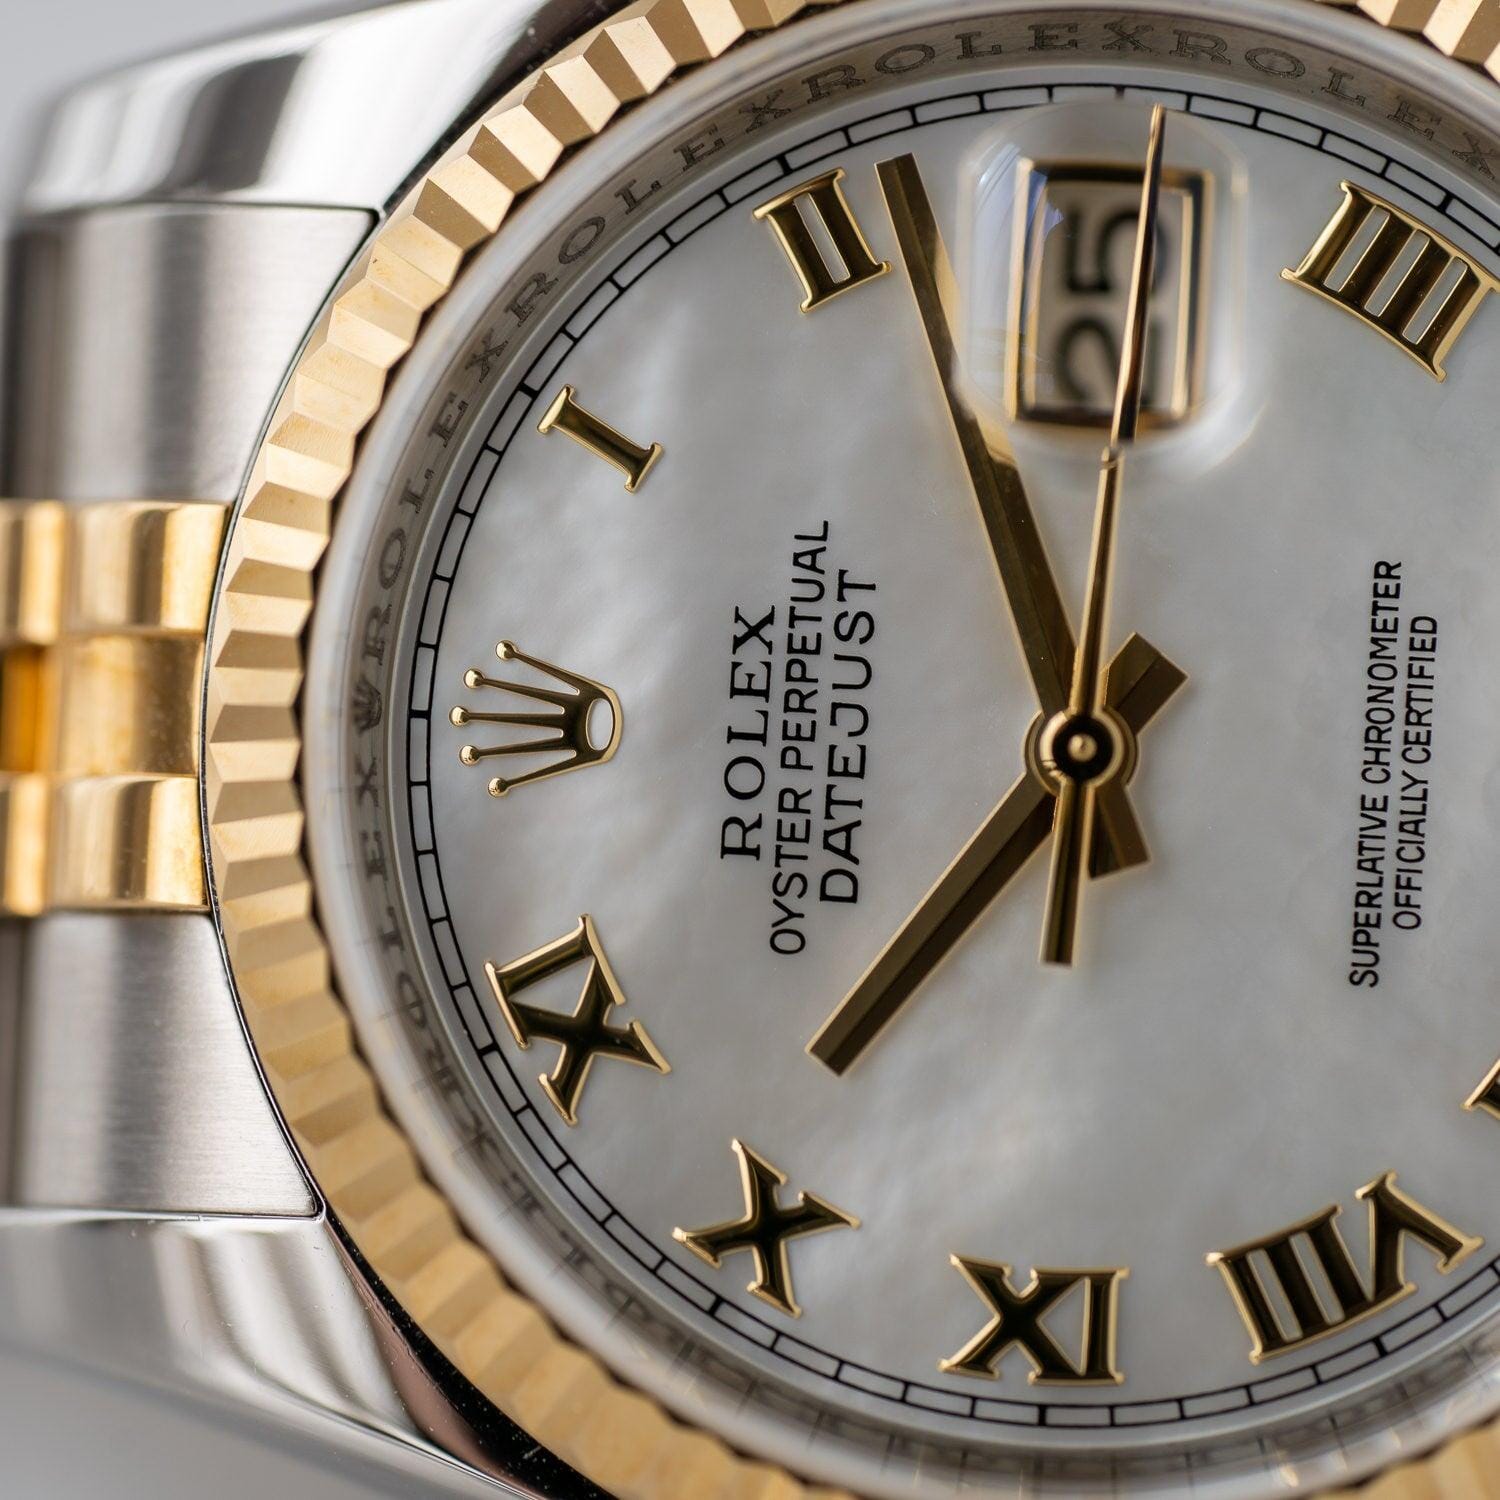 ROLEX Oyster Perpetual Datejust 116233NR MOP Dial - Arbitro